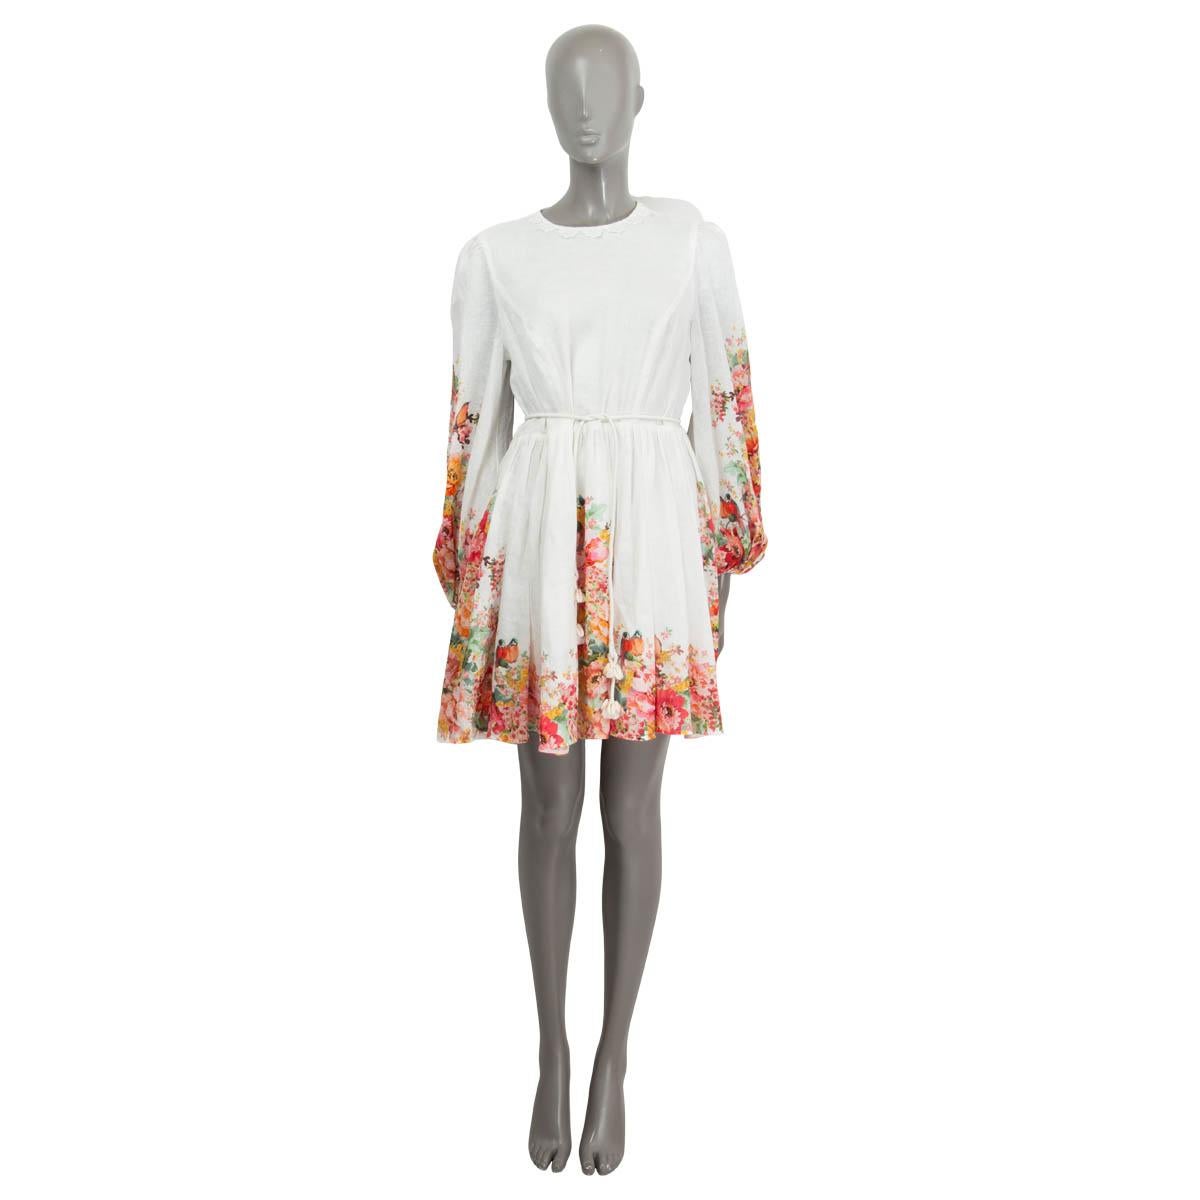 100% authentic Zimmermann Mae mini dress in ivory linen (100%). Lined in white cotton (100%). Opens with a concealed zip at the back. Features a floral and bird print, an embroidered round-neck, belt loops, two side slit pockets, elasticated cuffs